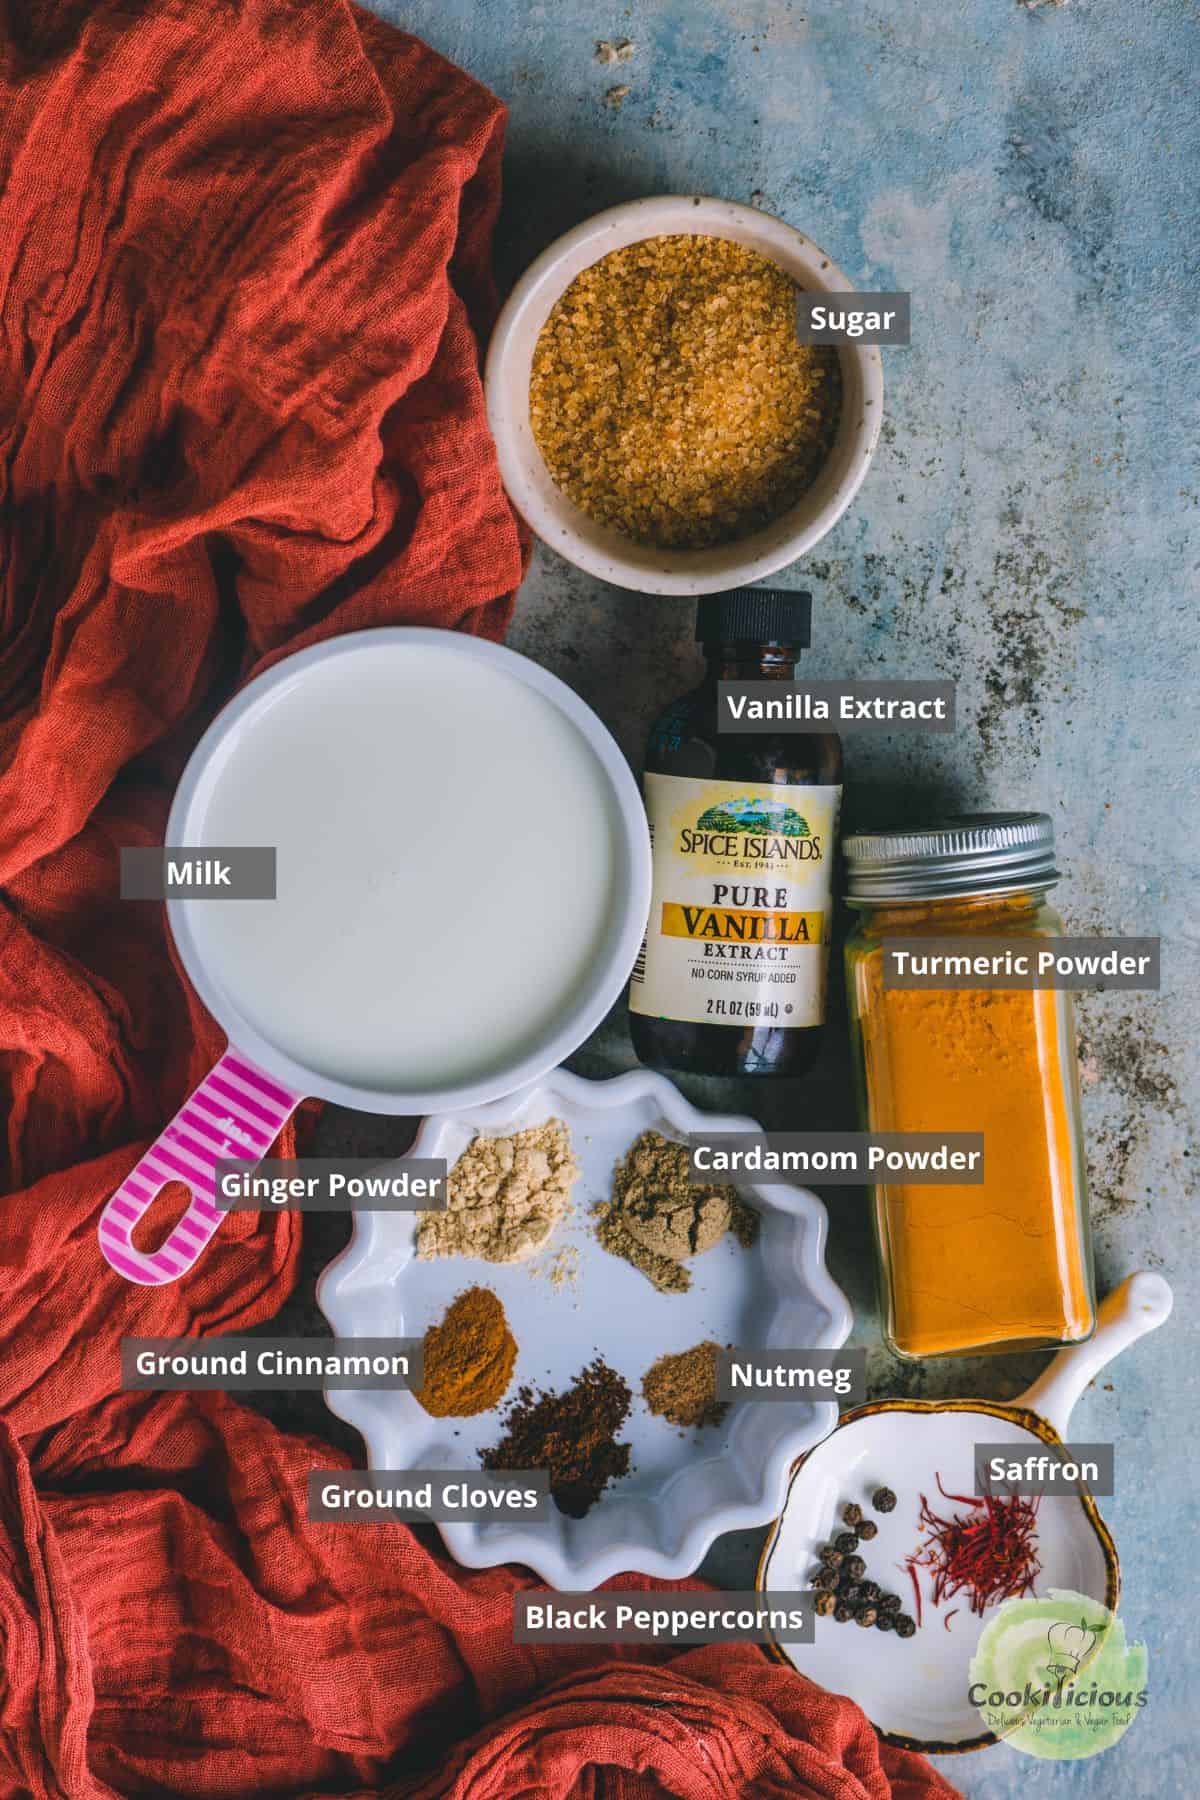 All ingredients needed to make Turmeric latte placed on a table with labels on them.